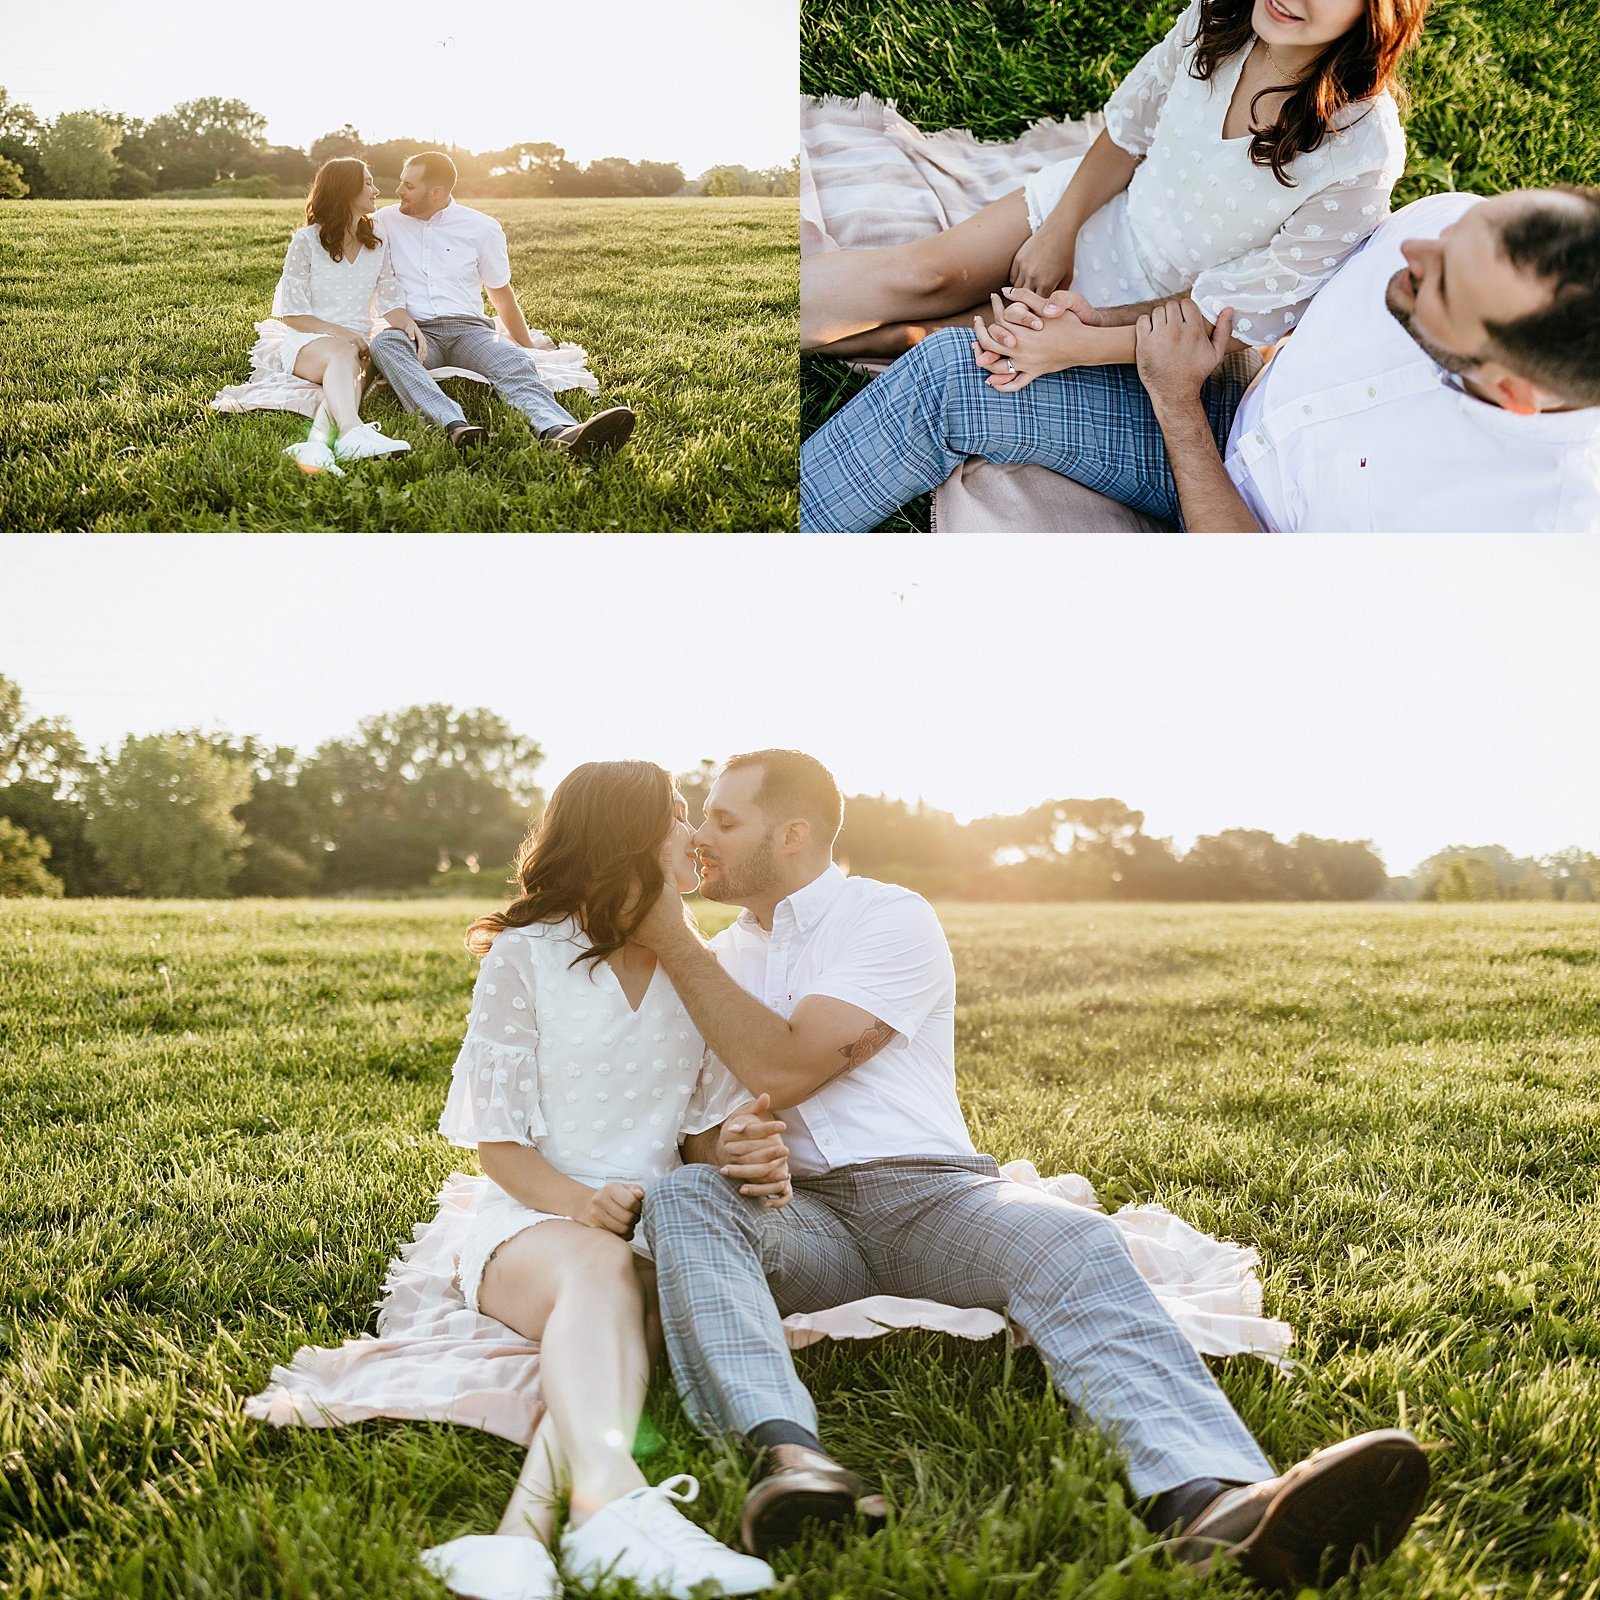  Couple kissing in the sunrise light while sitting on a blanket in a field for a picnic.  